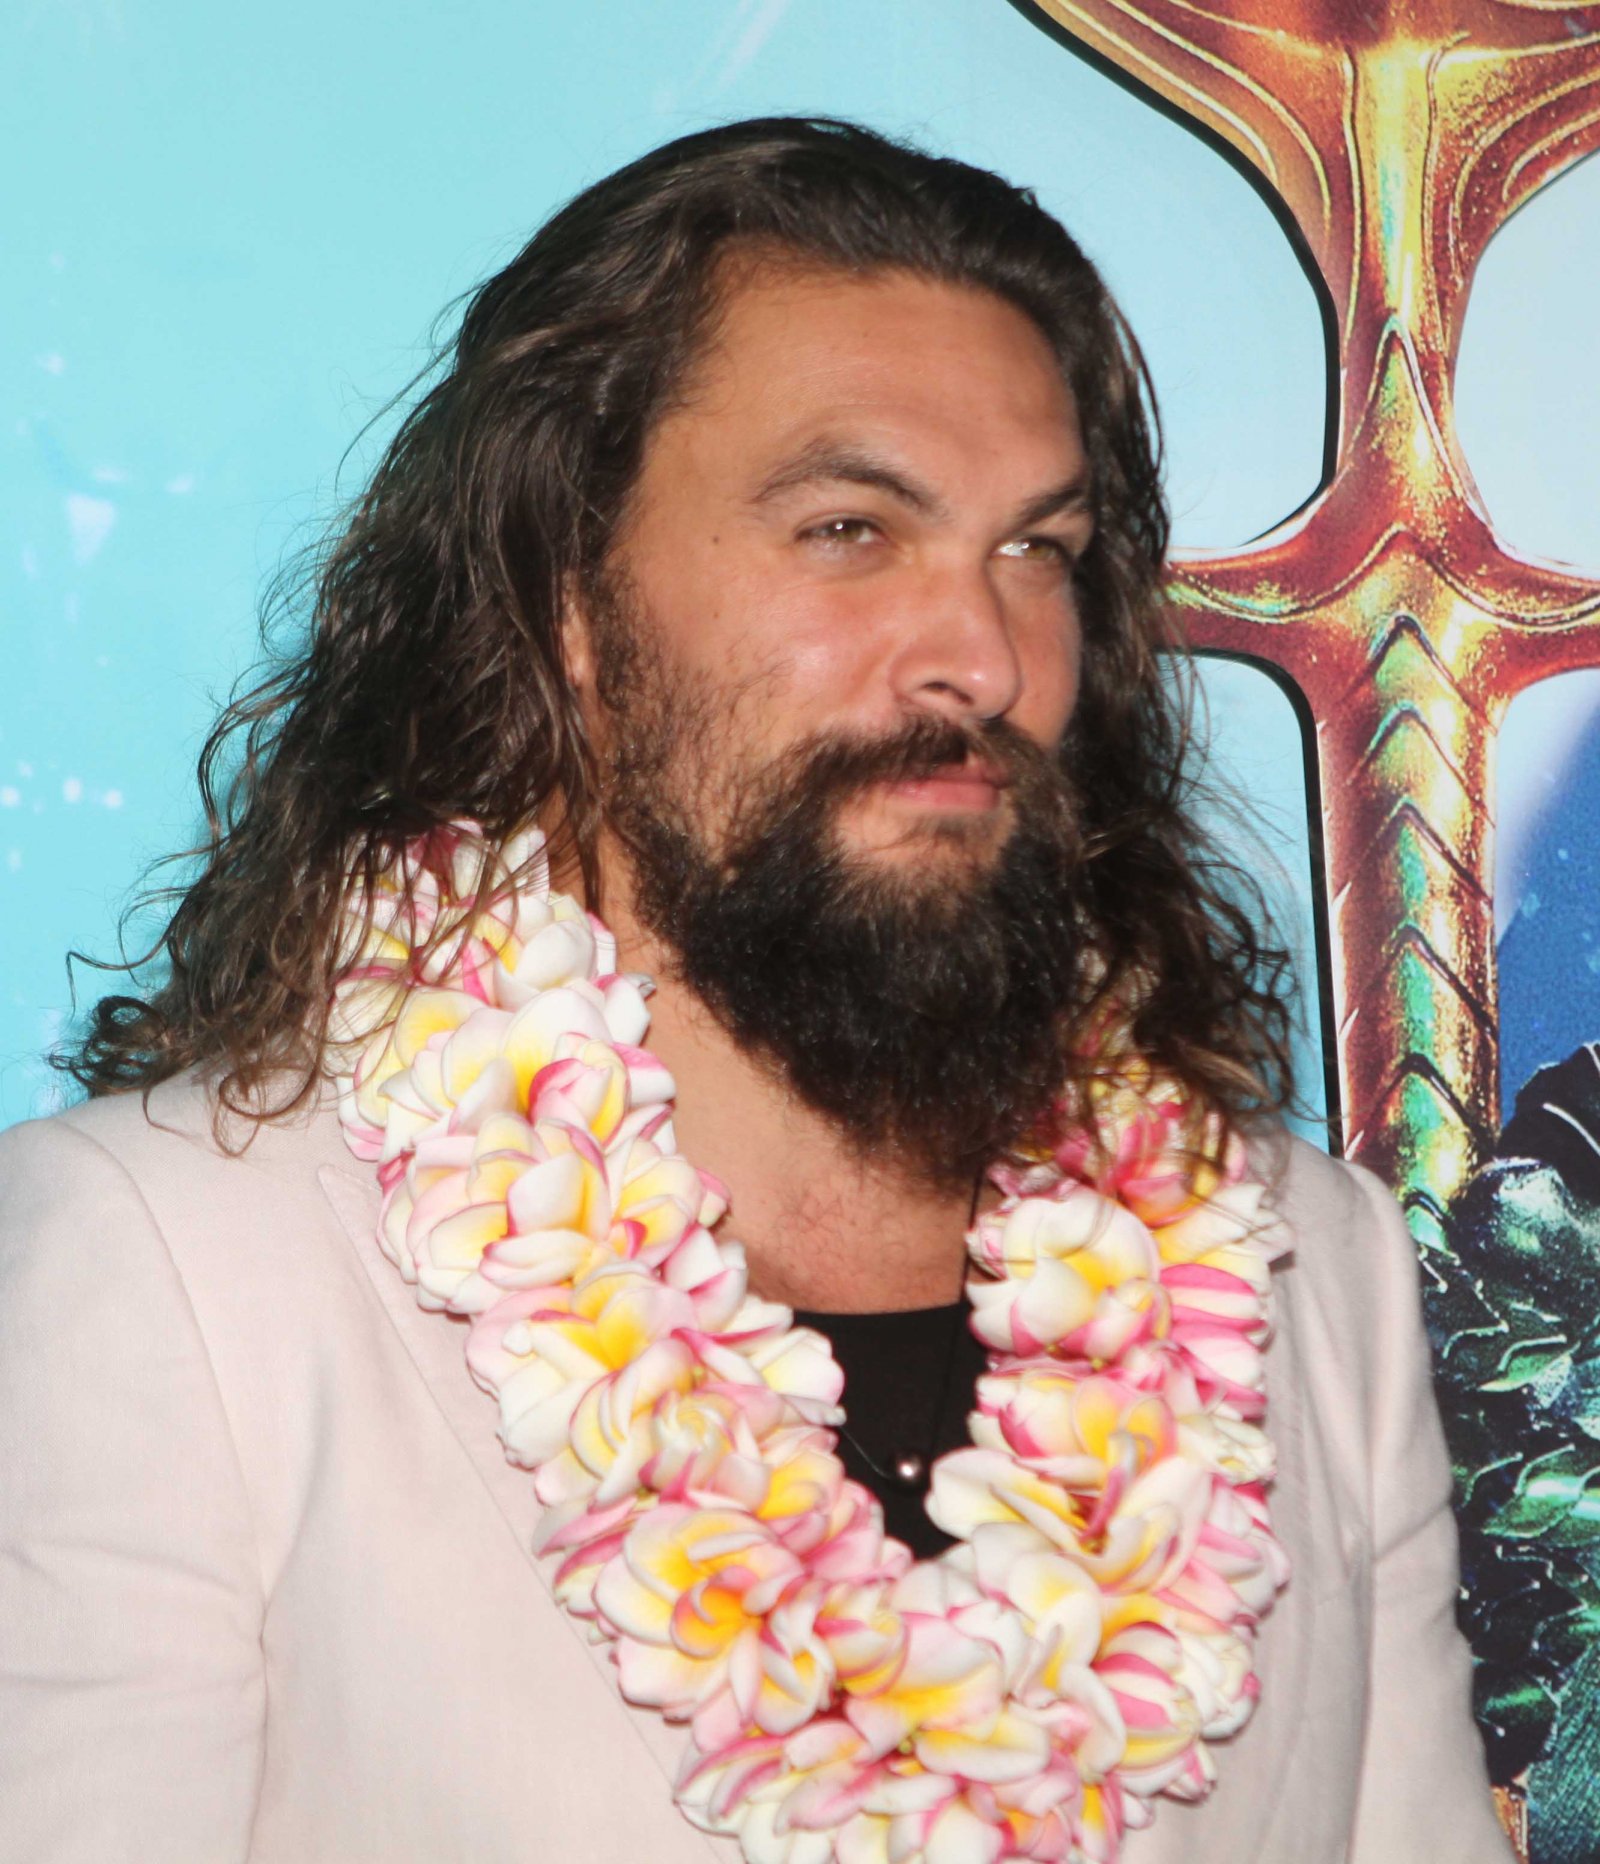 Jason Momoa Vs Dave Bautista In See Wallpapers